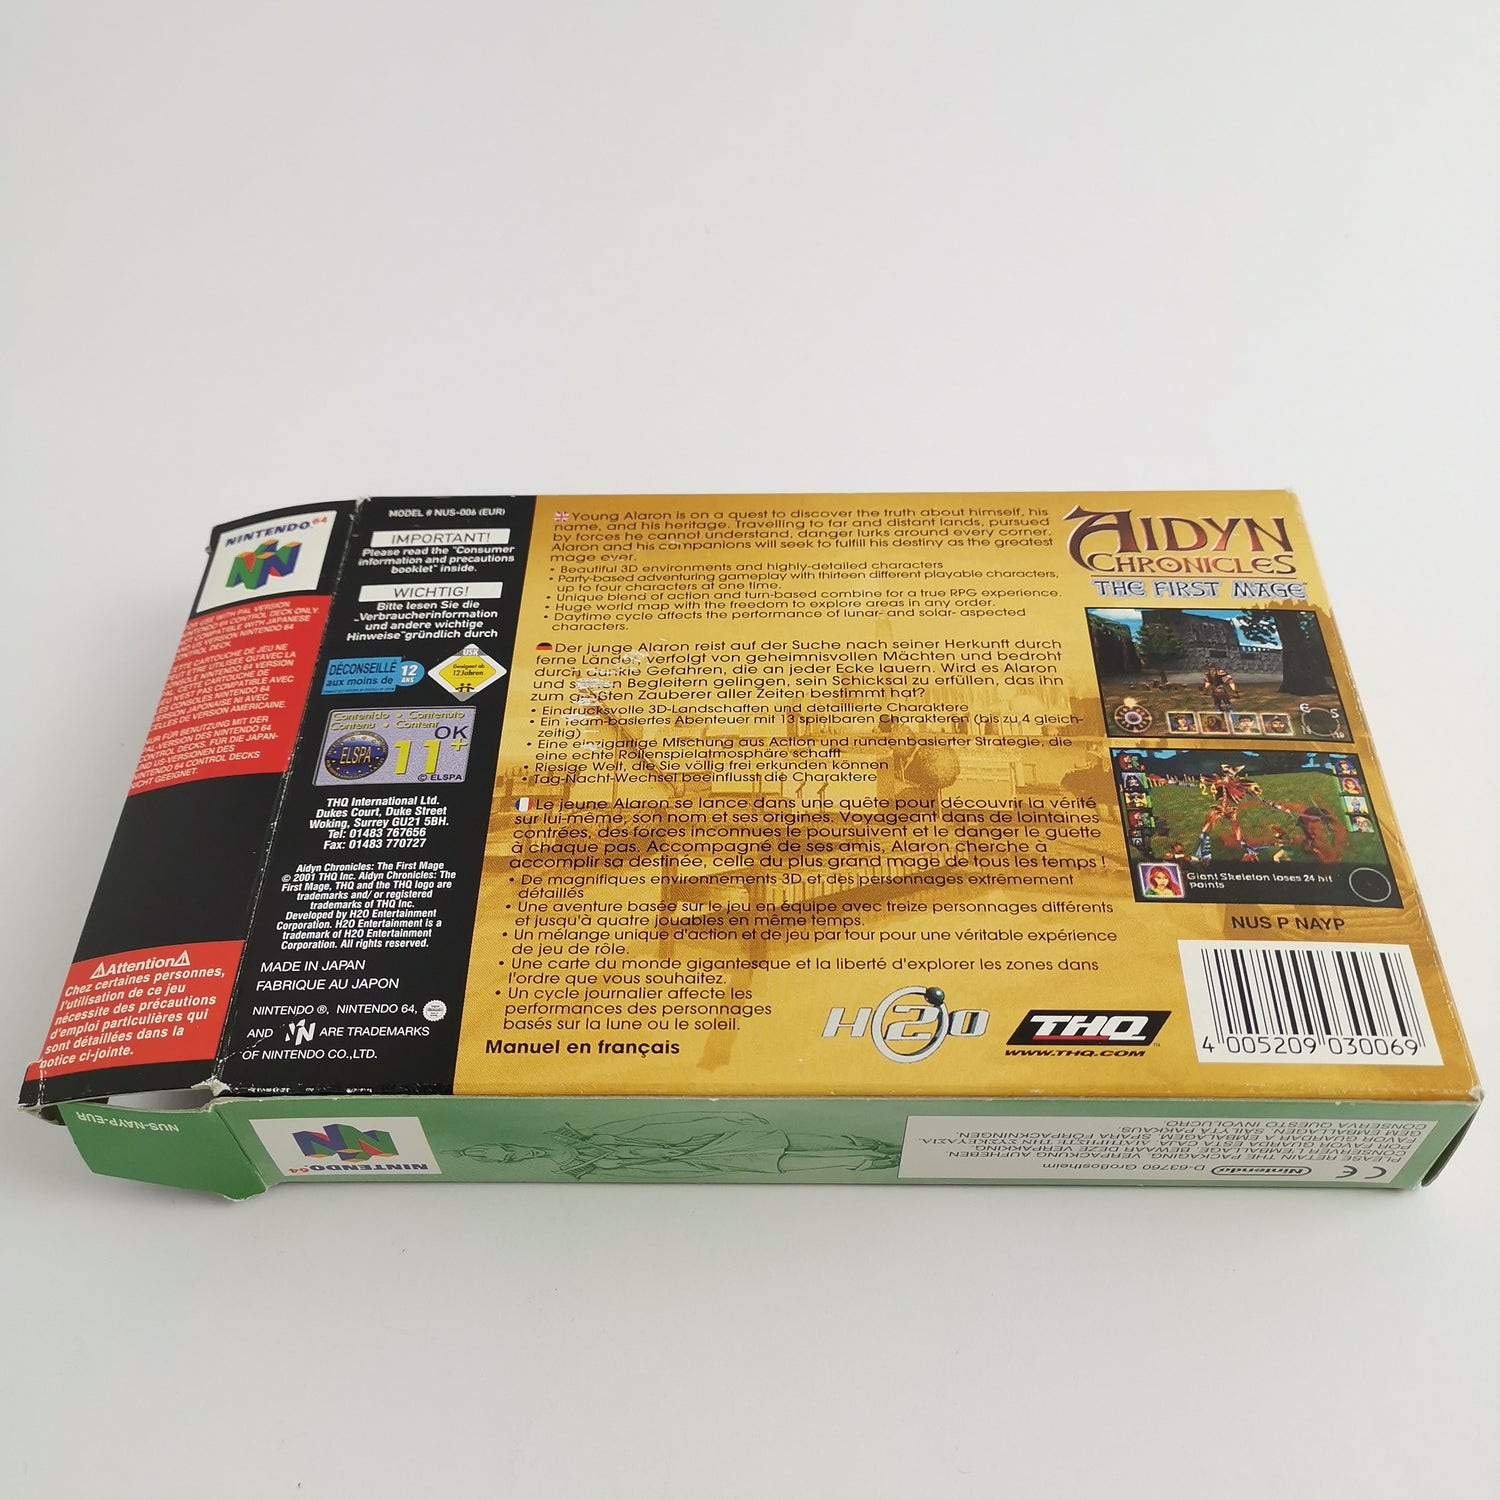 Nintendo 64 Game: Aidyn Chronicles The First Mage | N64 - original packaging PAL version